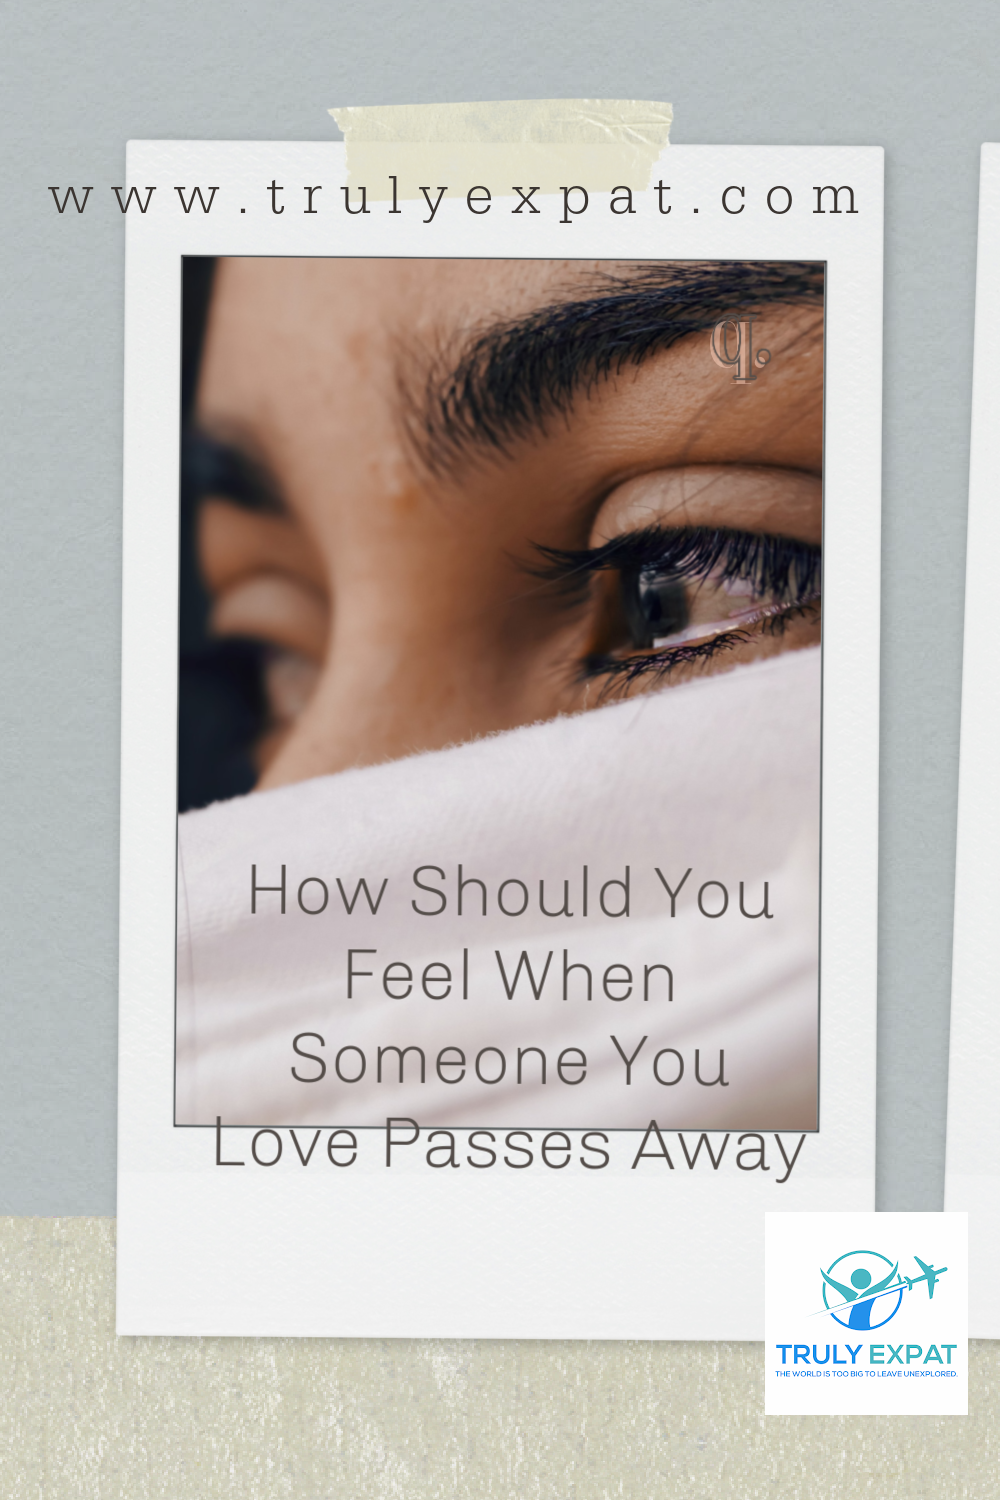 How should you feel when someone you love passes away